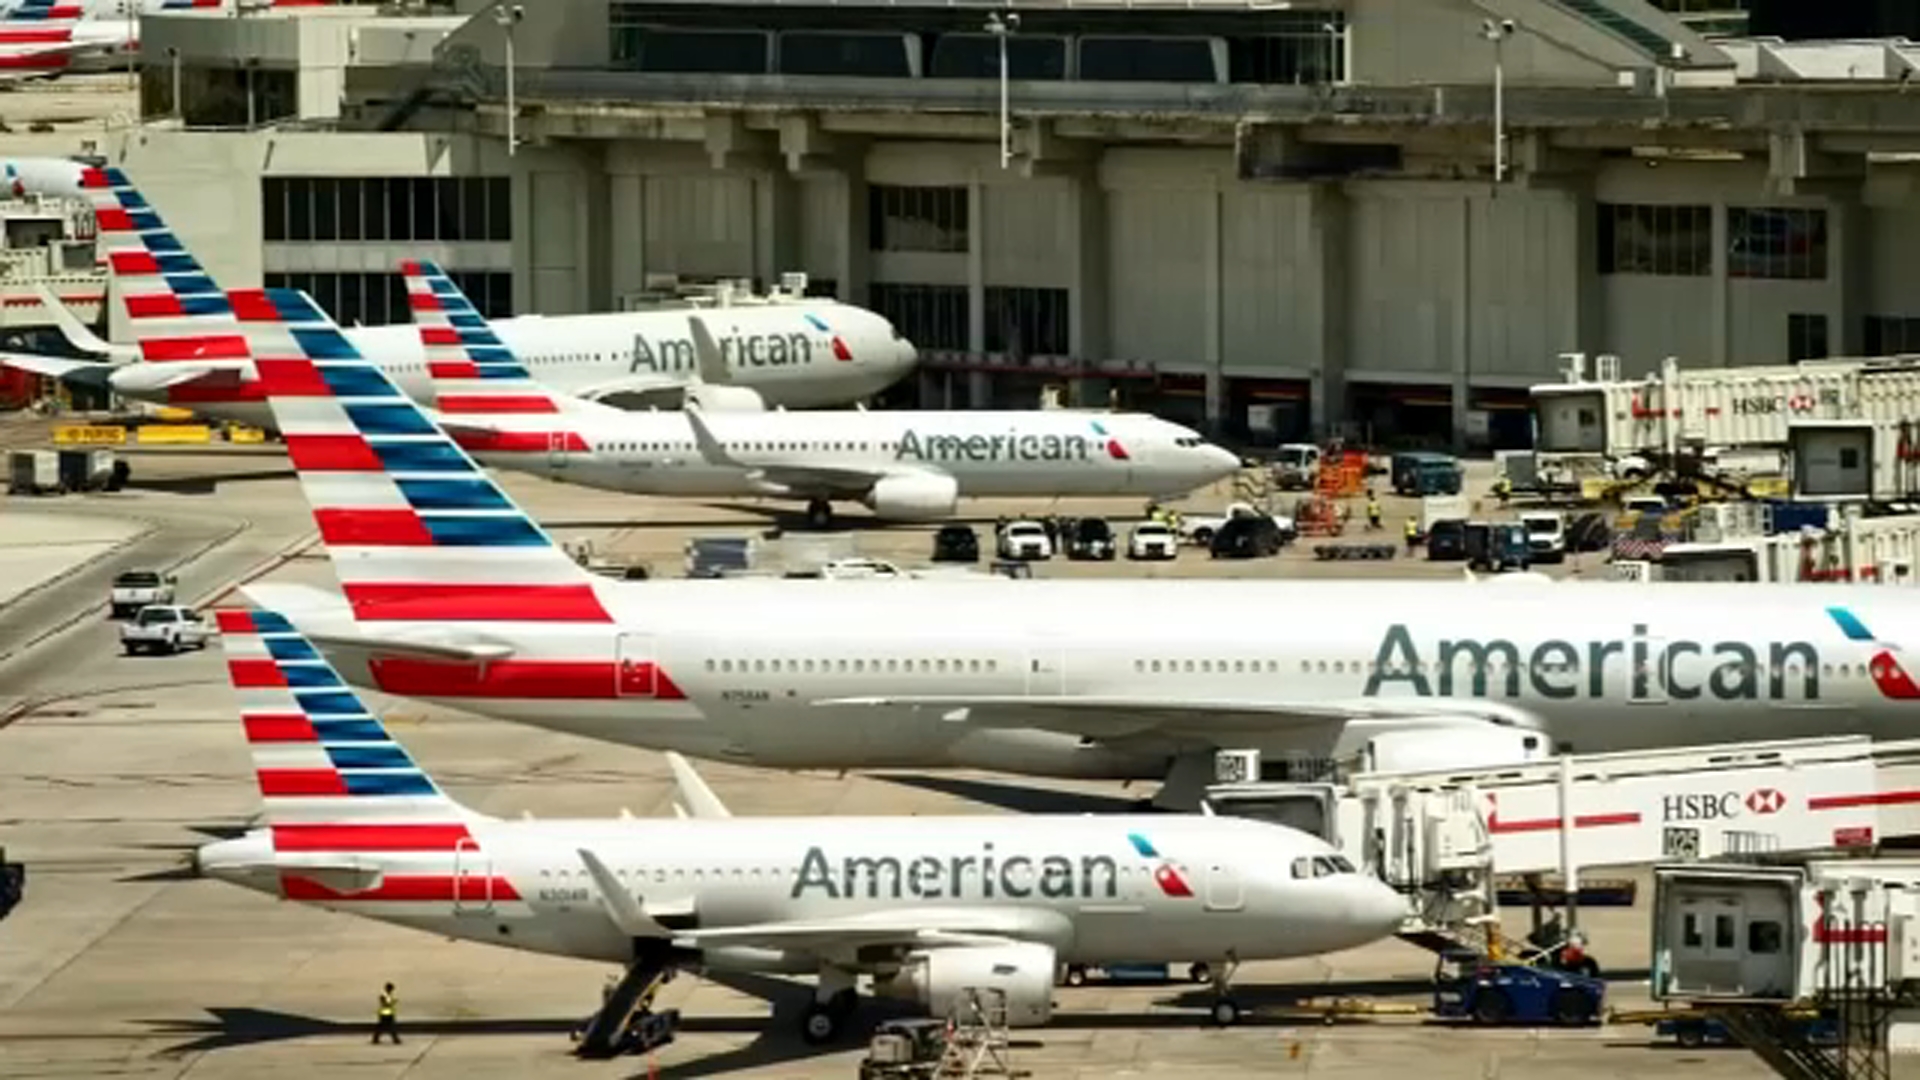 More than 1.6 thousand flights of American Airlines have been cancelled due to bad weather and lack of personnel